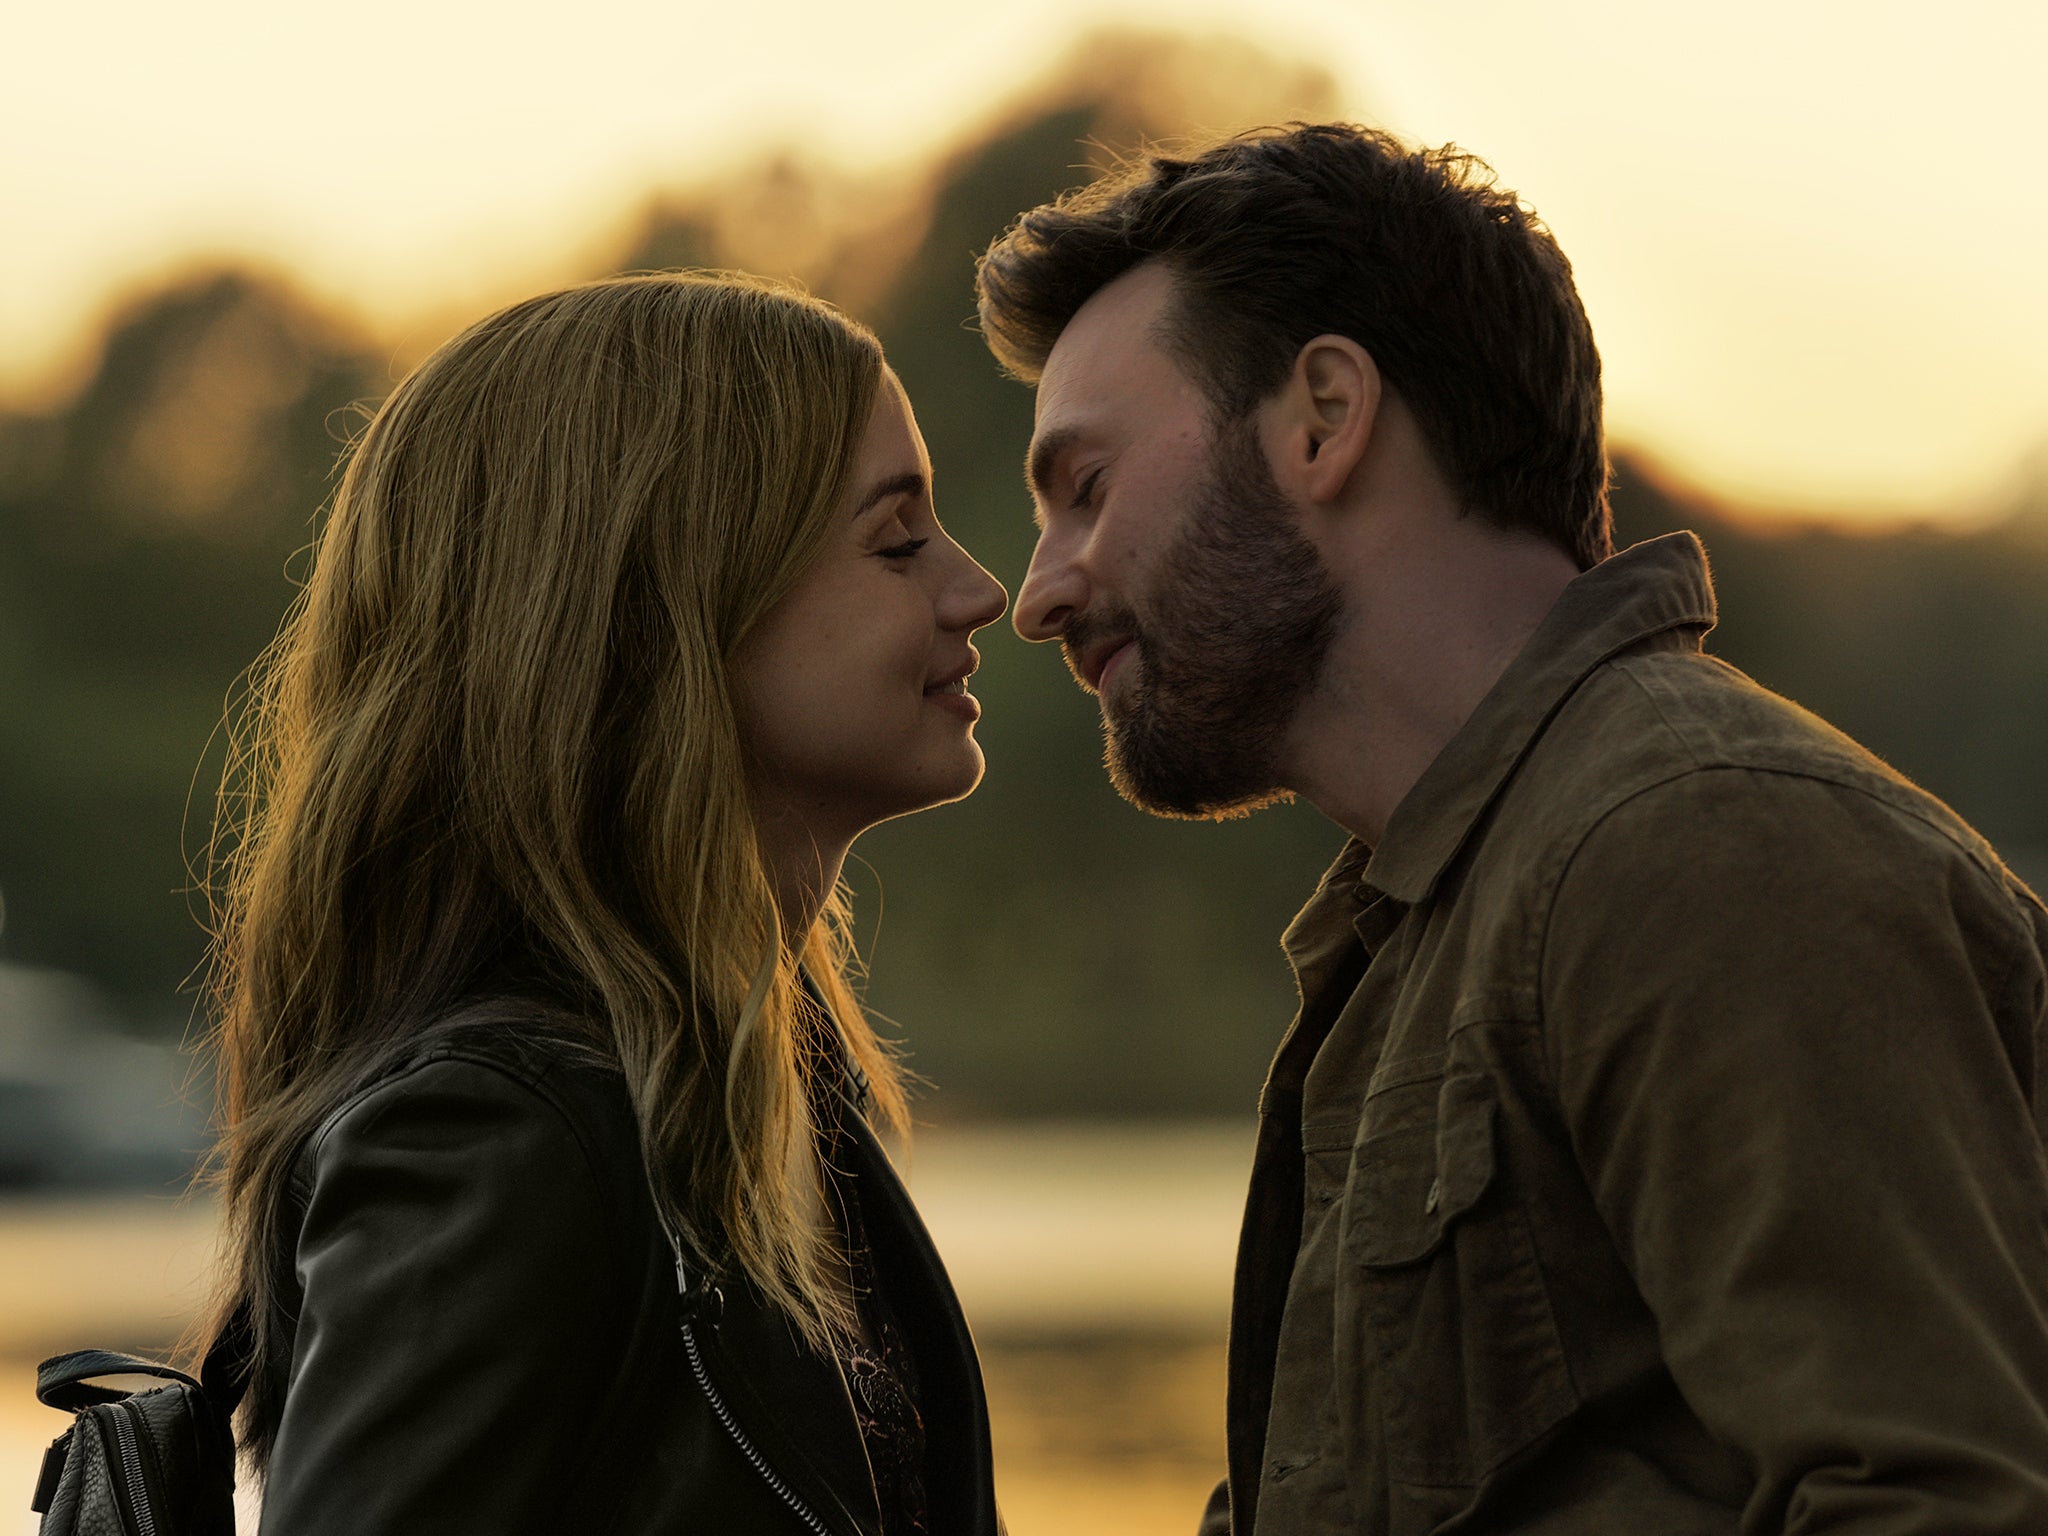 Ghosted film review Chris Evans and Ana de Armas’s chemistry must have